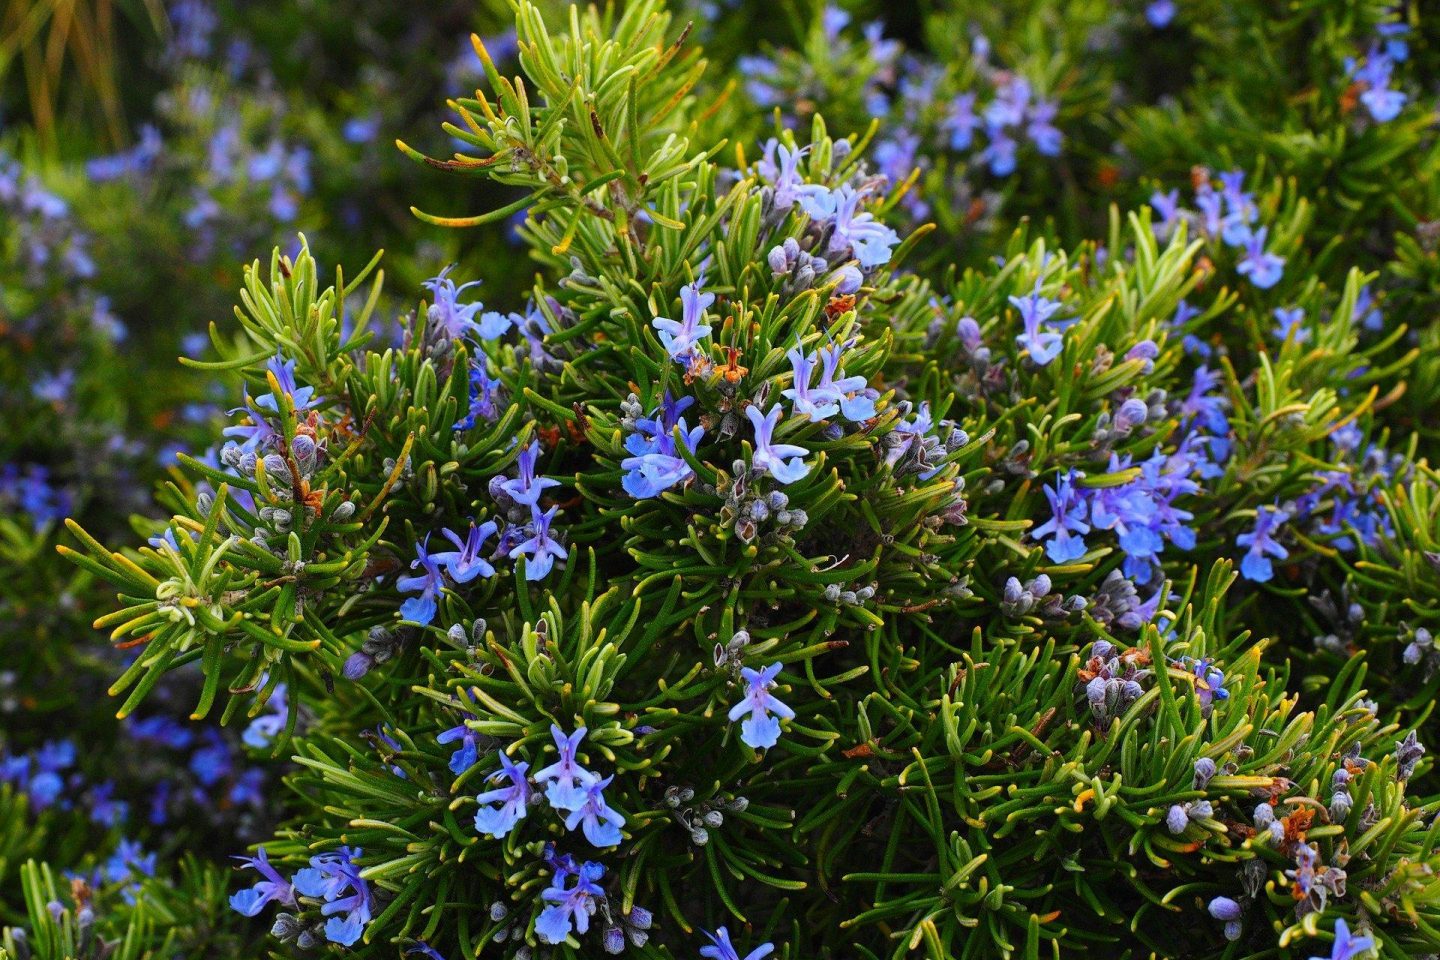 A large rosemary bush in flower